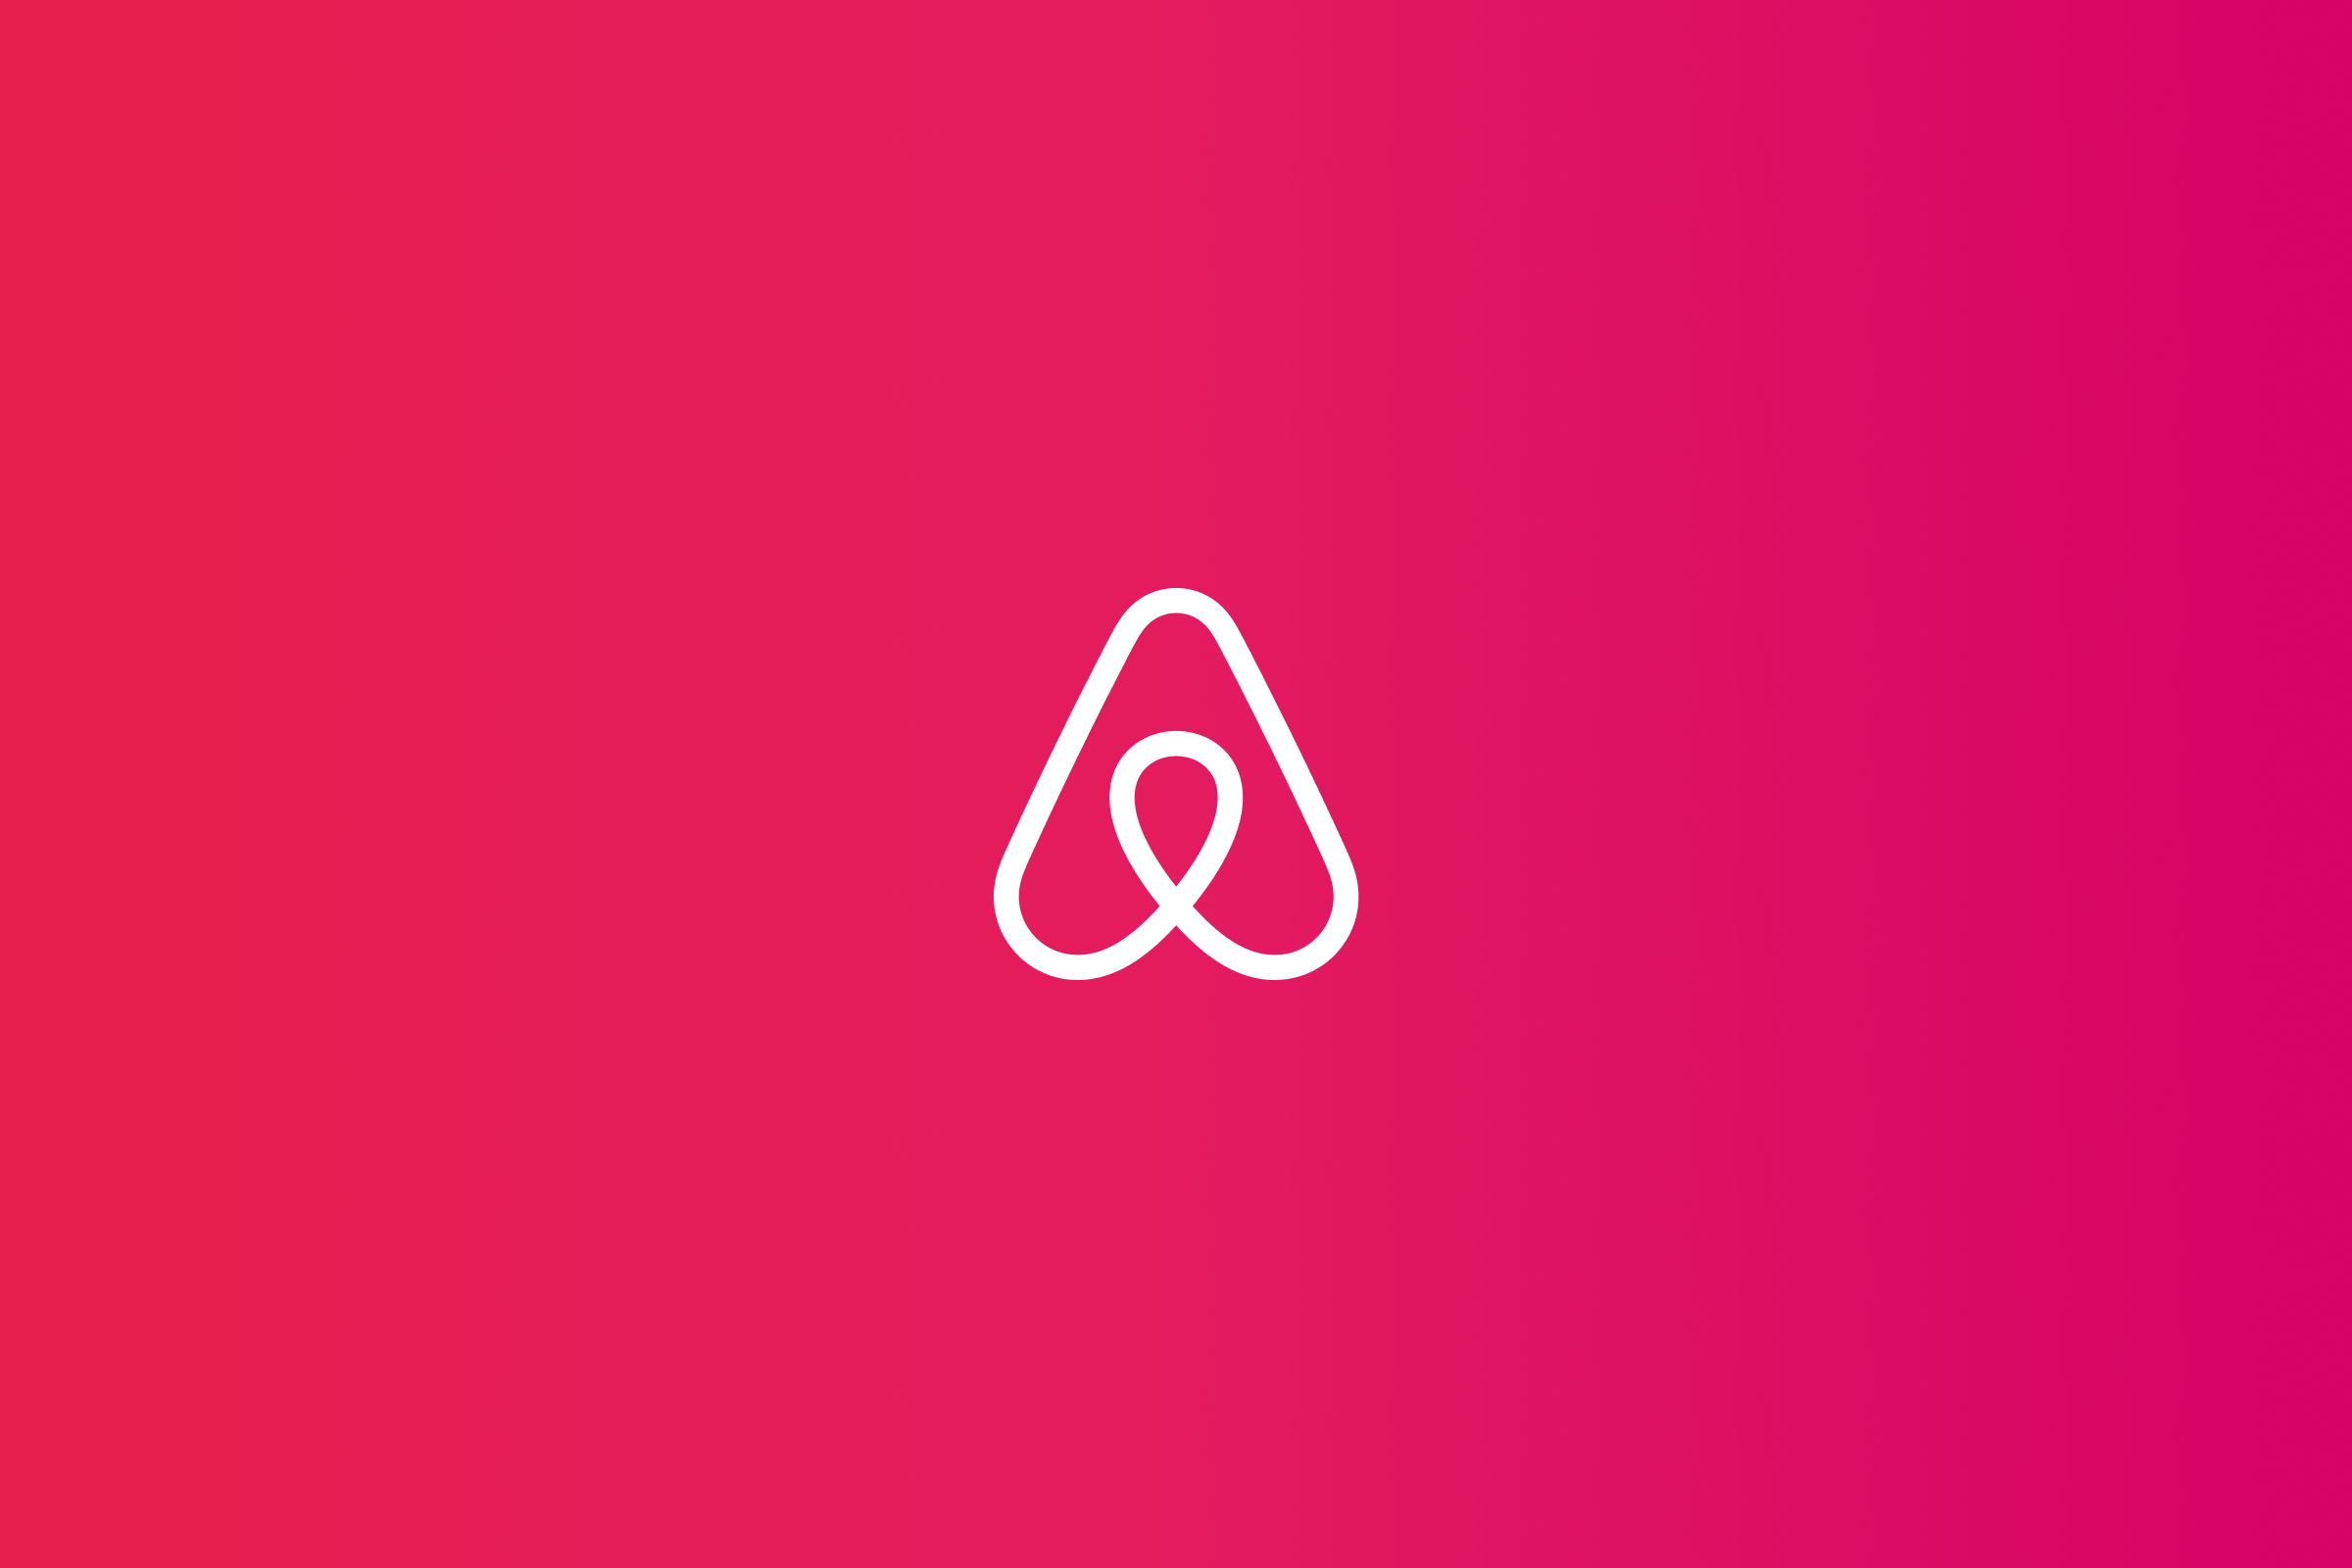 Airbnb logo placed on deep pink gradient colored background